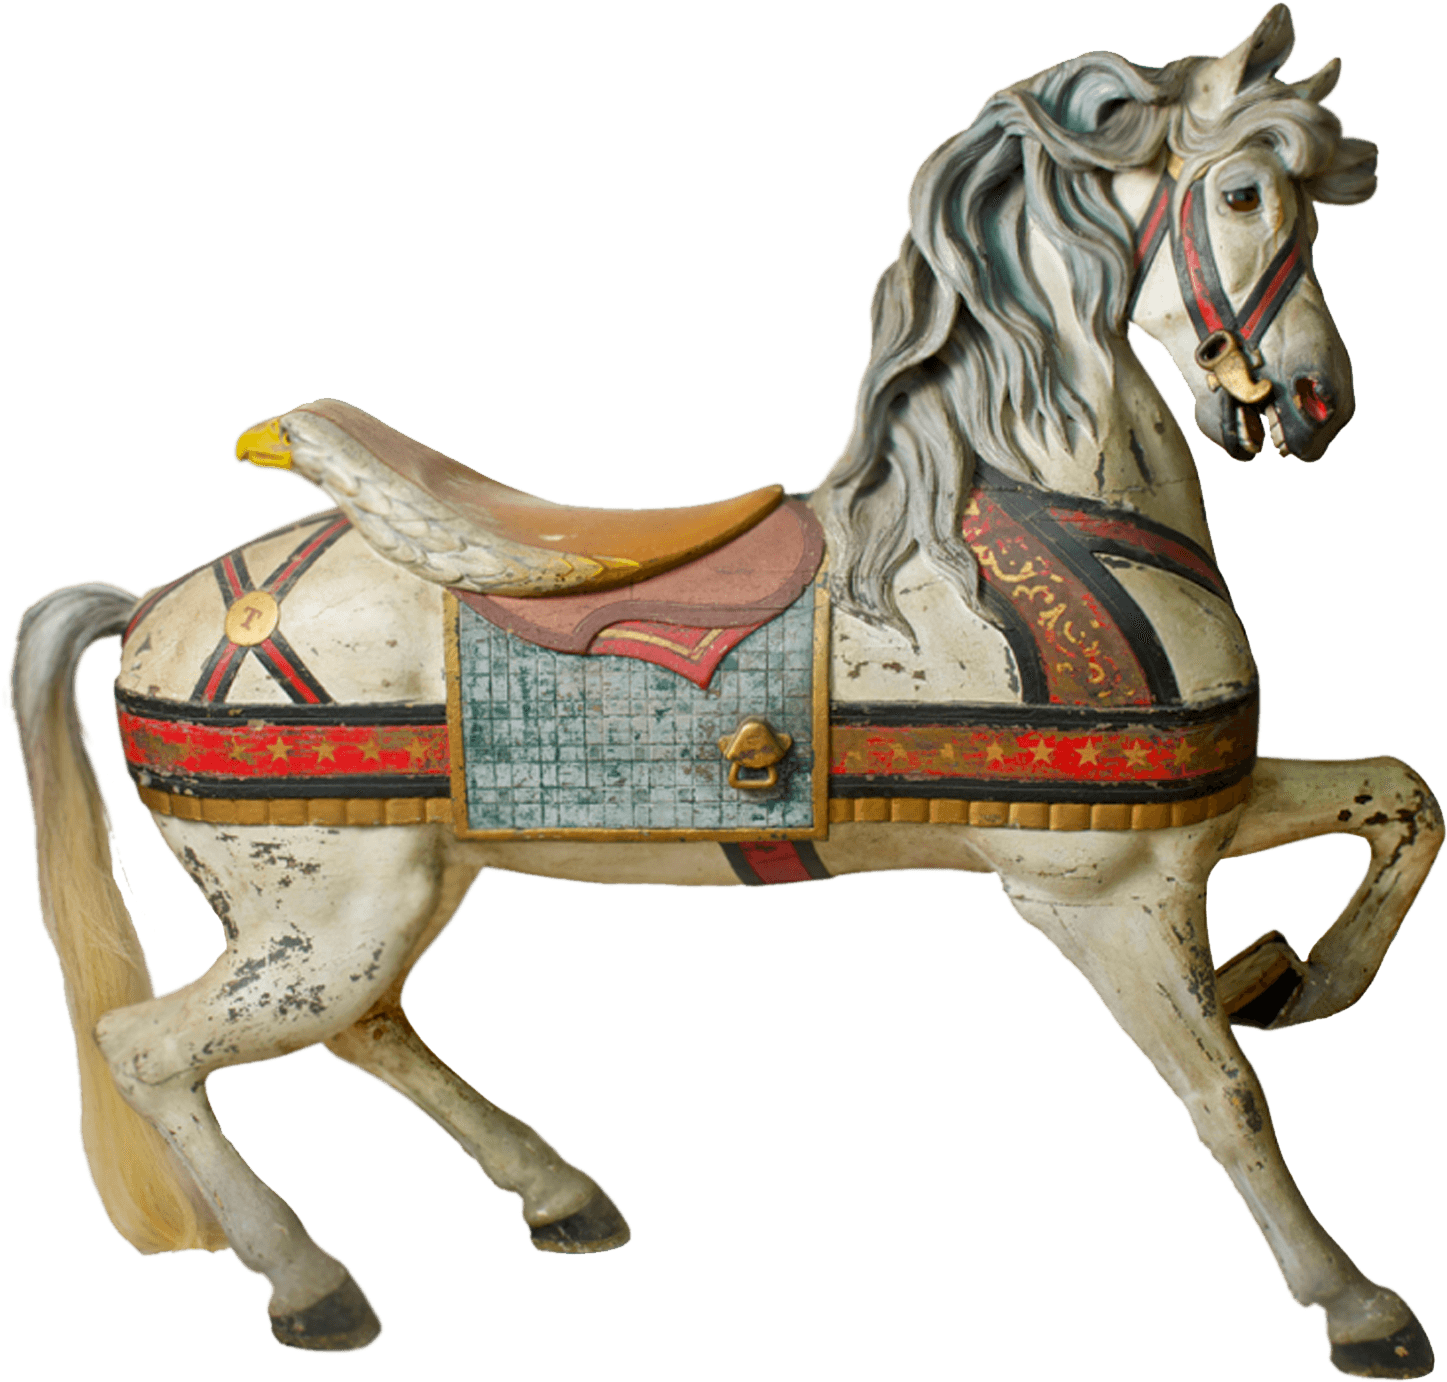 Antique Carousel Horse Png - Carousel Horse Transparent Background (1500x1500)